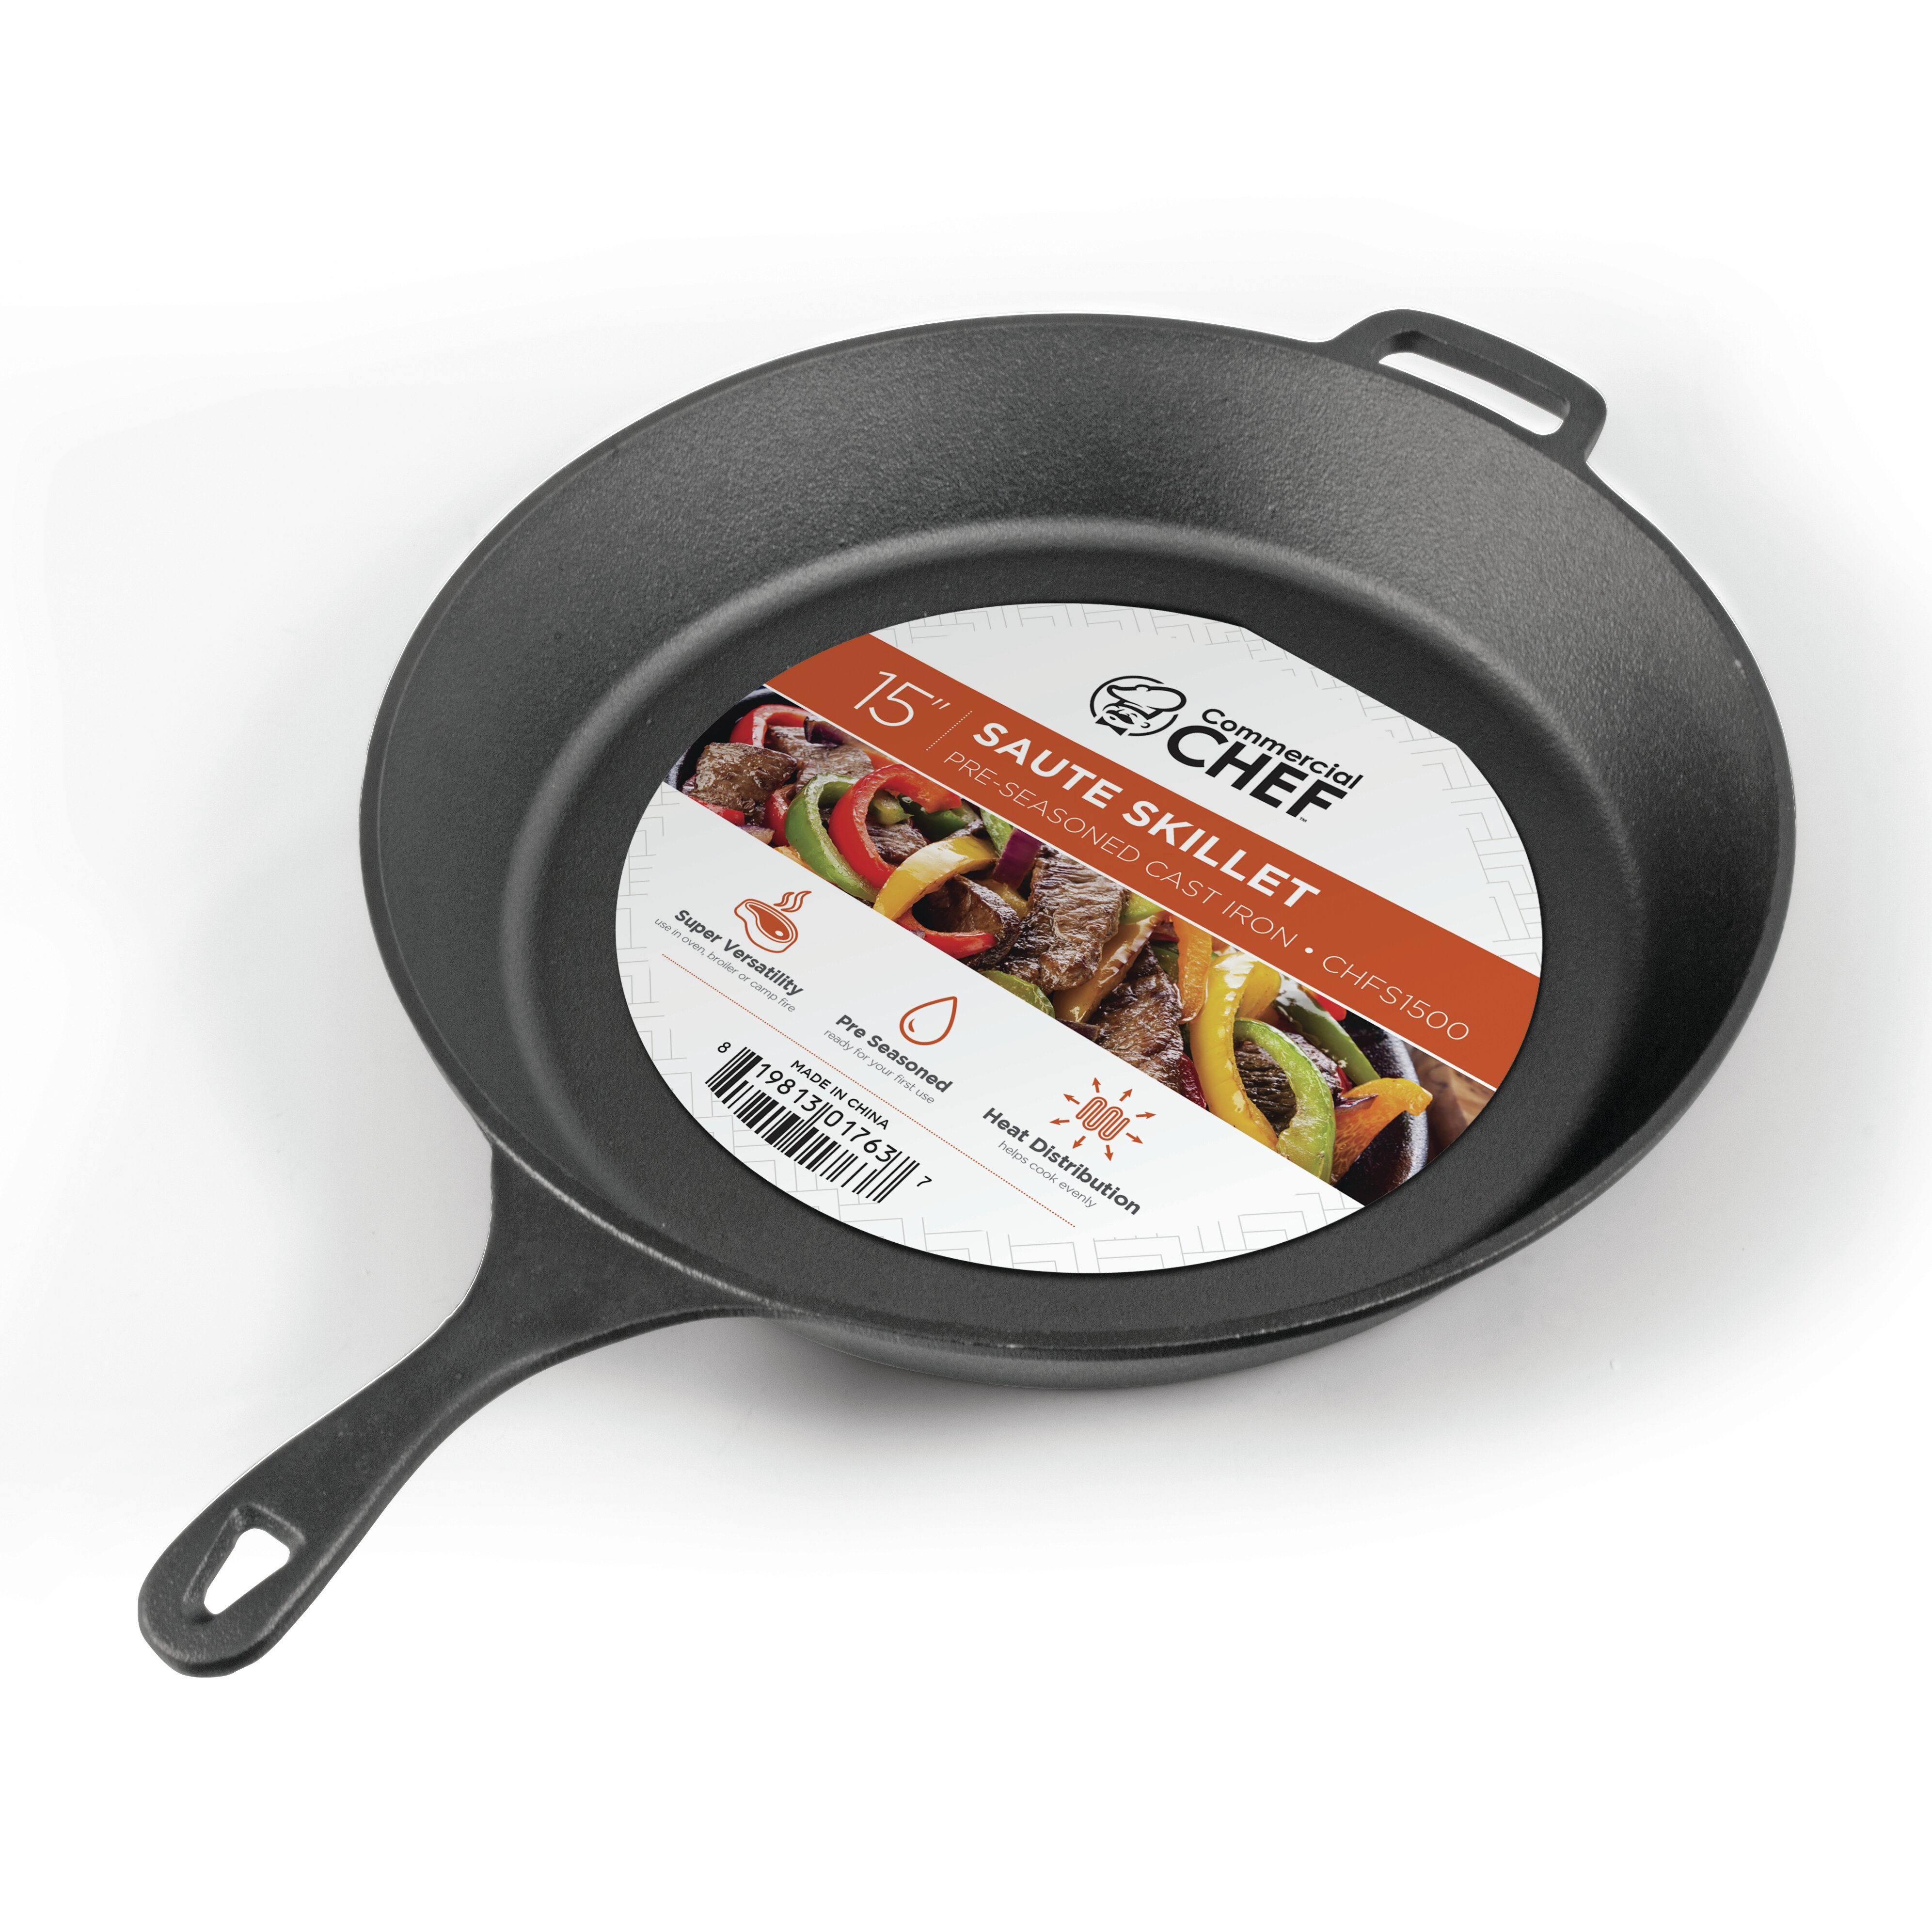 Saute Fry Pan - Chefs Pan, Pre-seasoned Cast Iron Skillet - Nonstick Frying  Pan - Safe Grill Cookware For Indoor & Outdoor Use - Cast Iron Pan